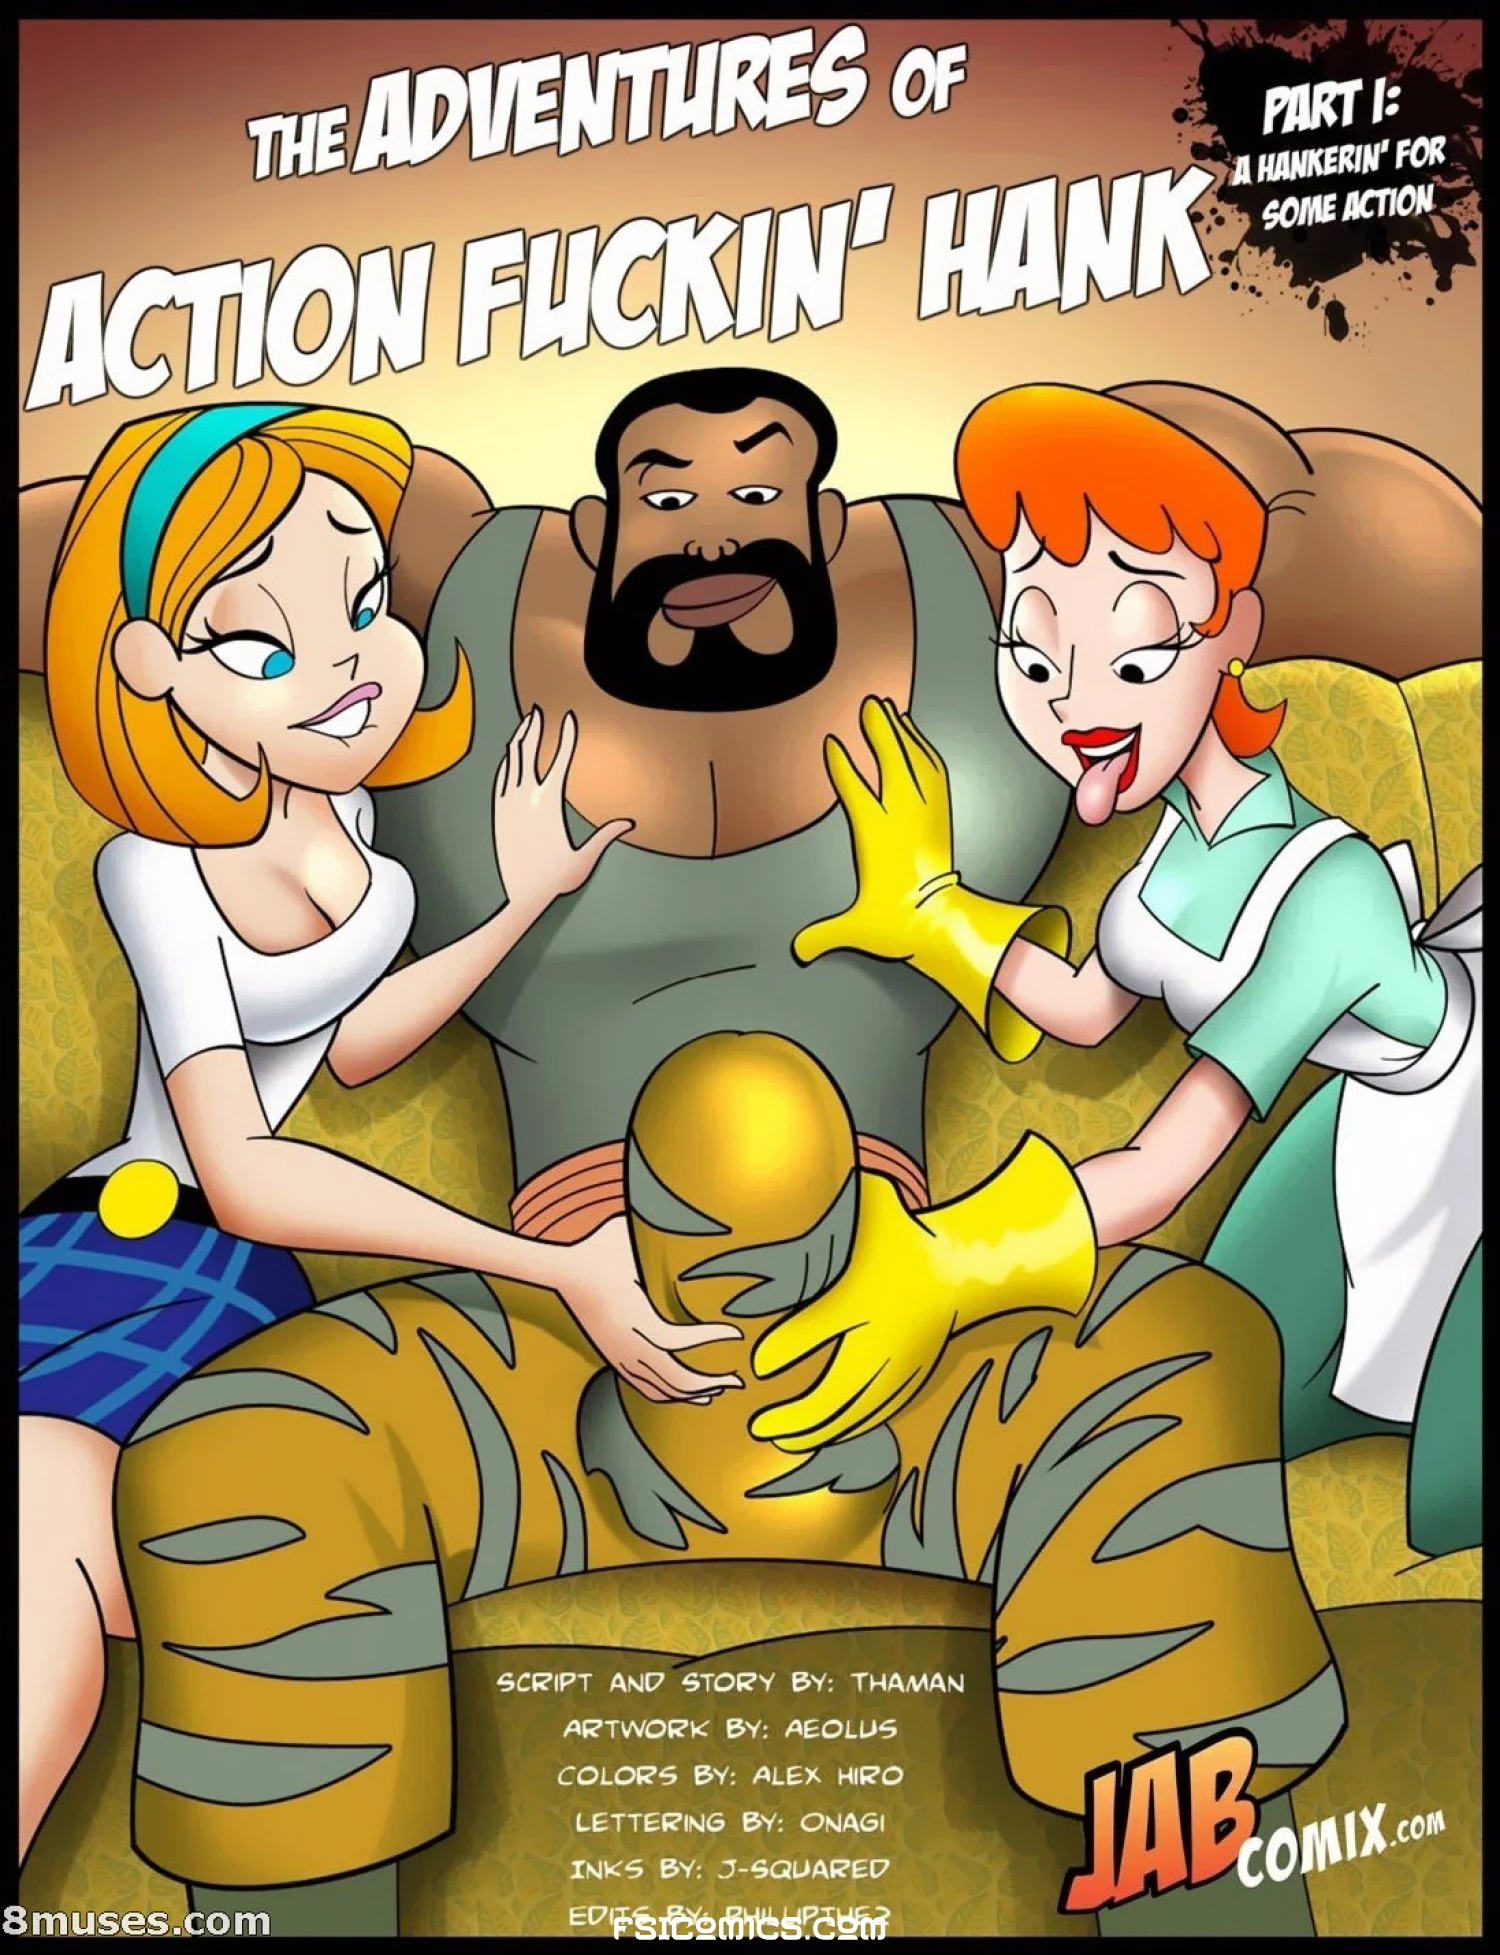 The Adventures Of Action Fuckin’ Hank Chapter 1 - A Hankerin' For Some Action – JABComix - 35 - FSIComics